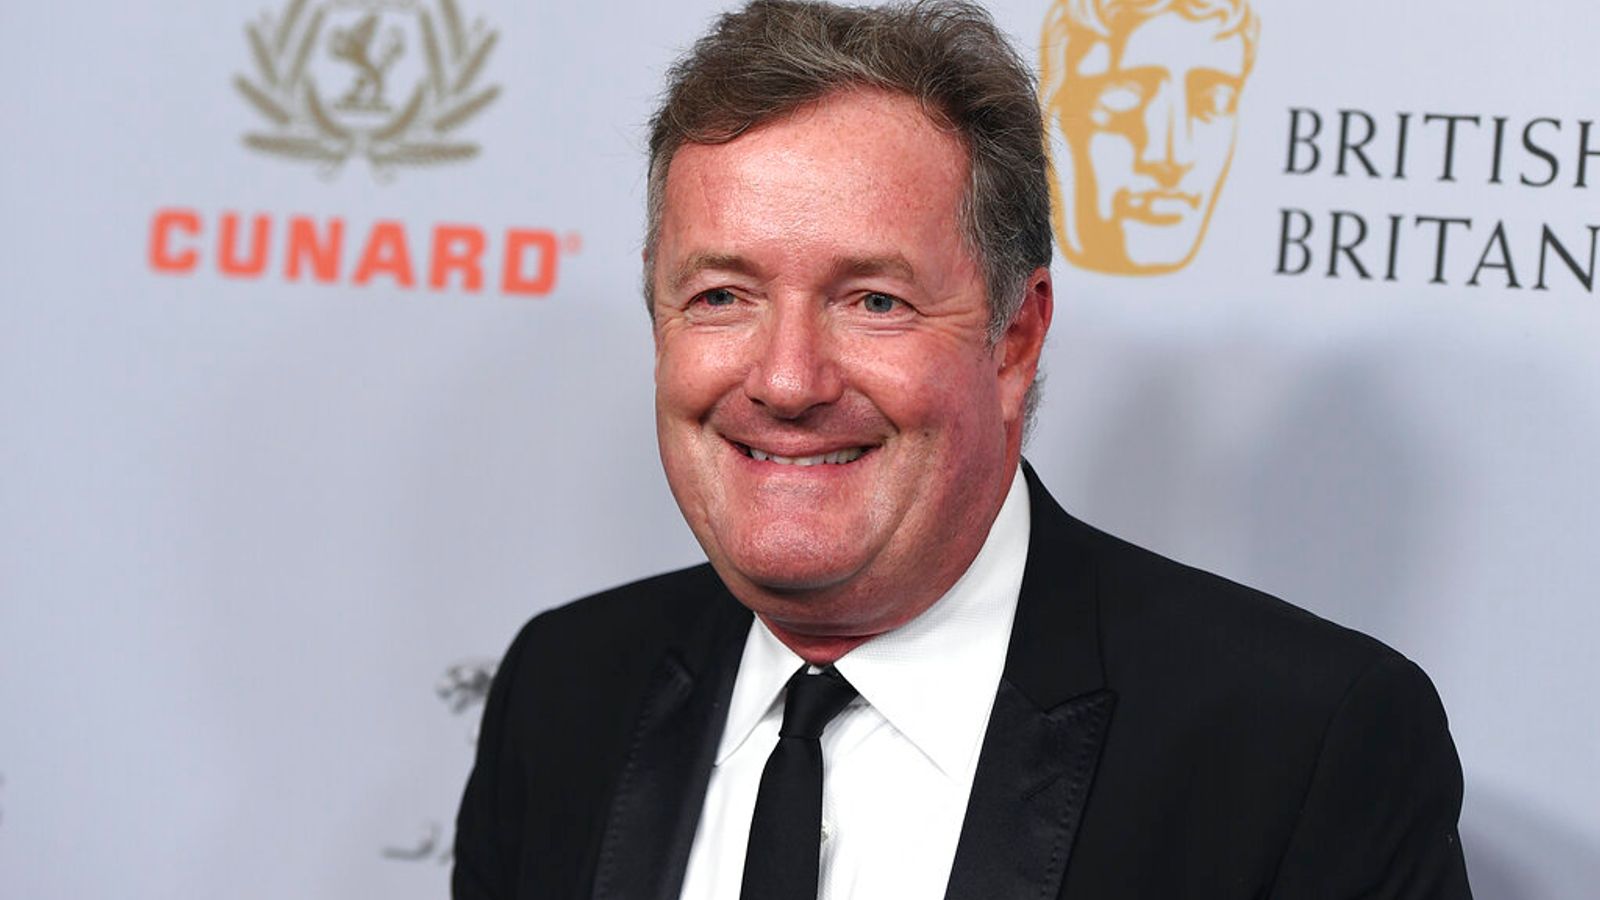 Piers Morgan knew how to hack phones and explained how, former Mirror journalist tells High Court